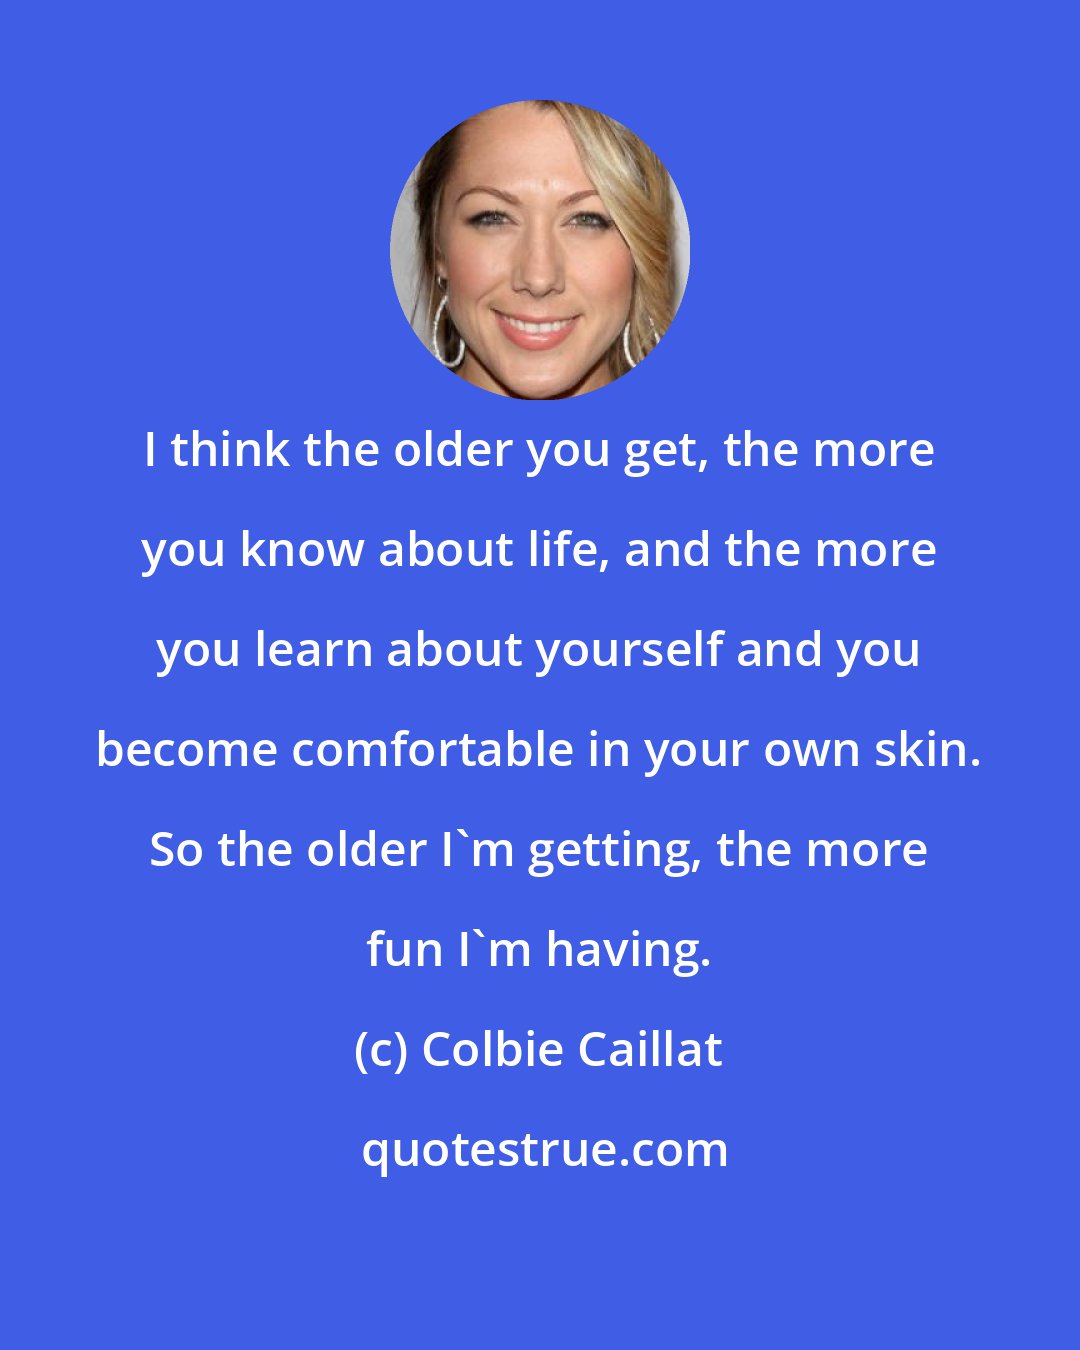 Colbie Caillat: I think the older you get, the more you know about life, and the more you learn about yourself and you become comfortable in your own skin. So the older I'm getting, the more fun I'm having.